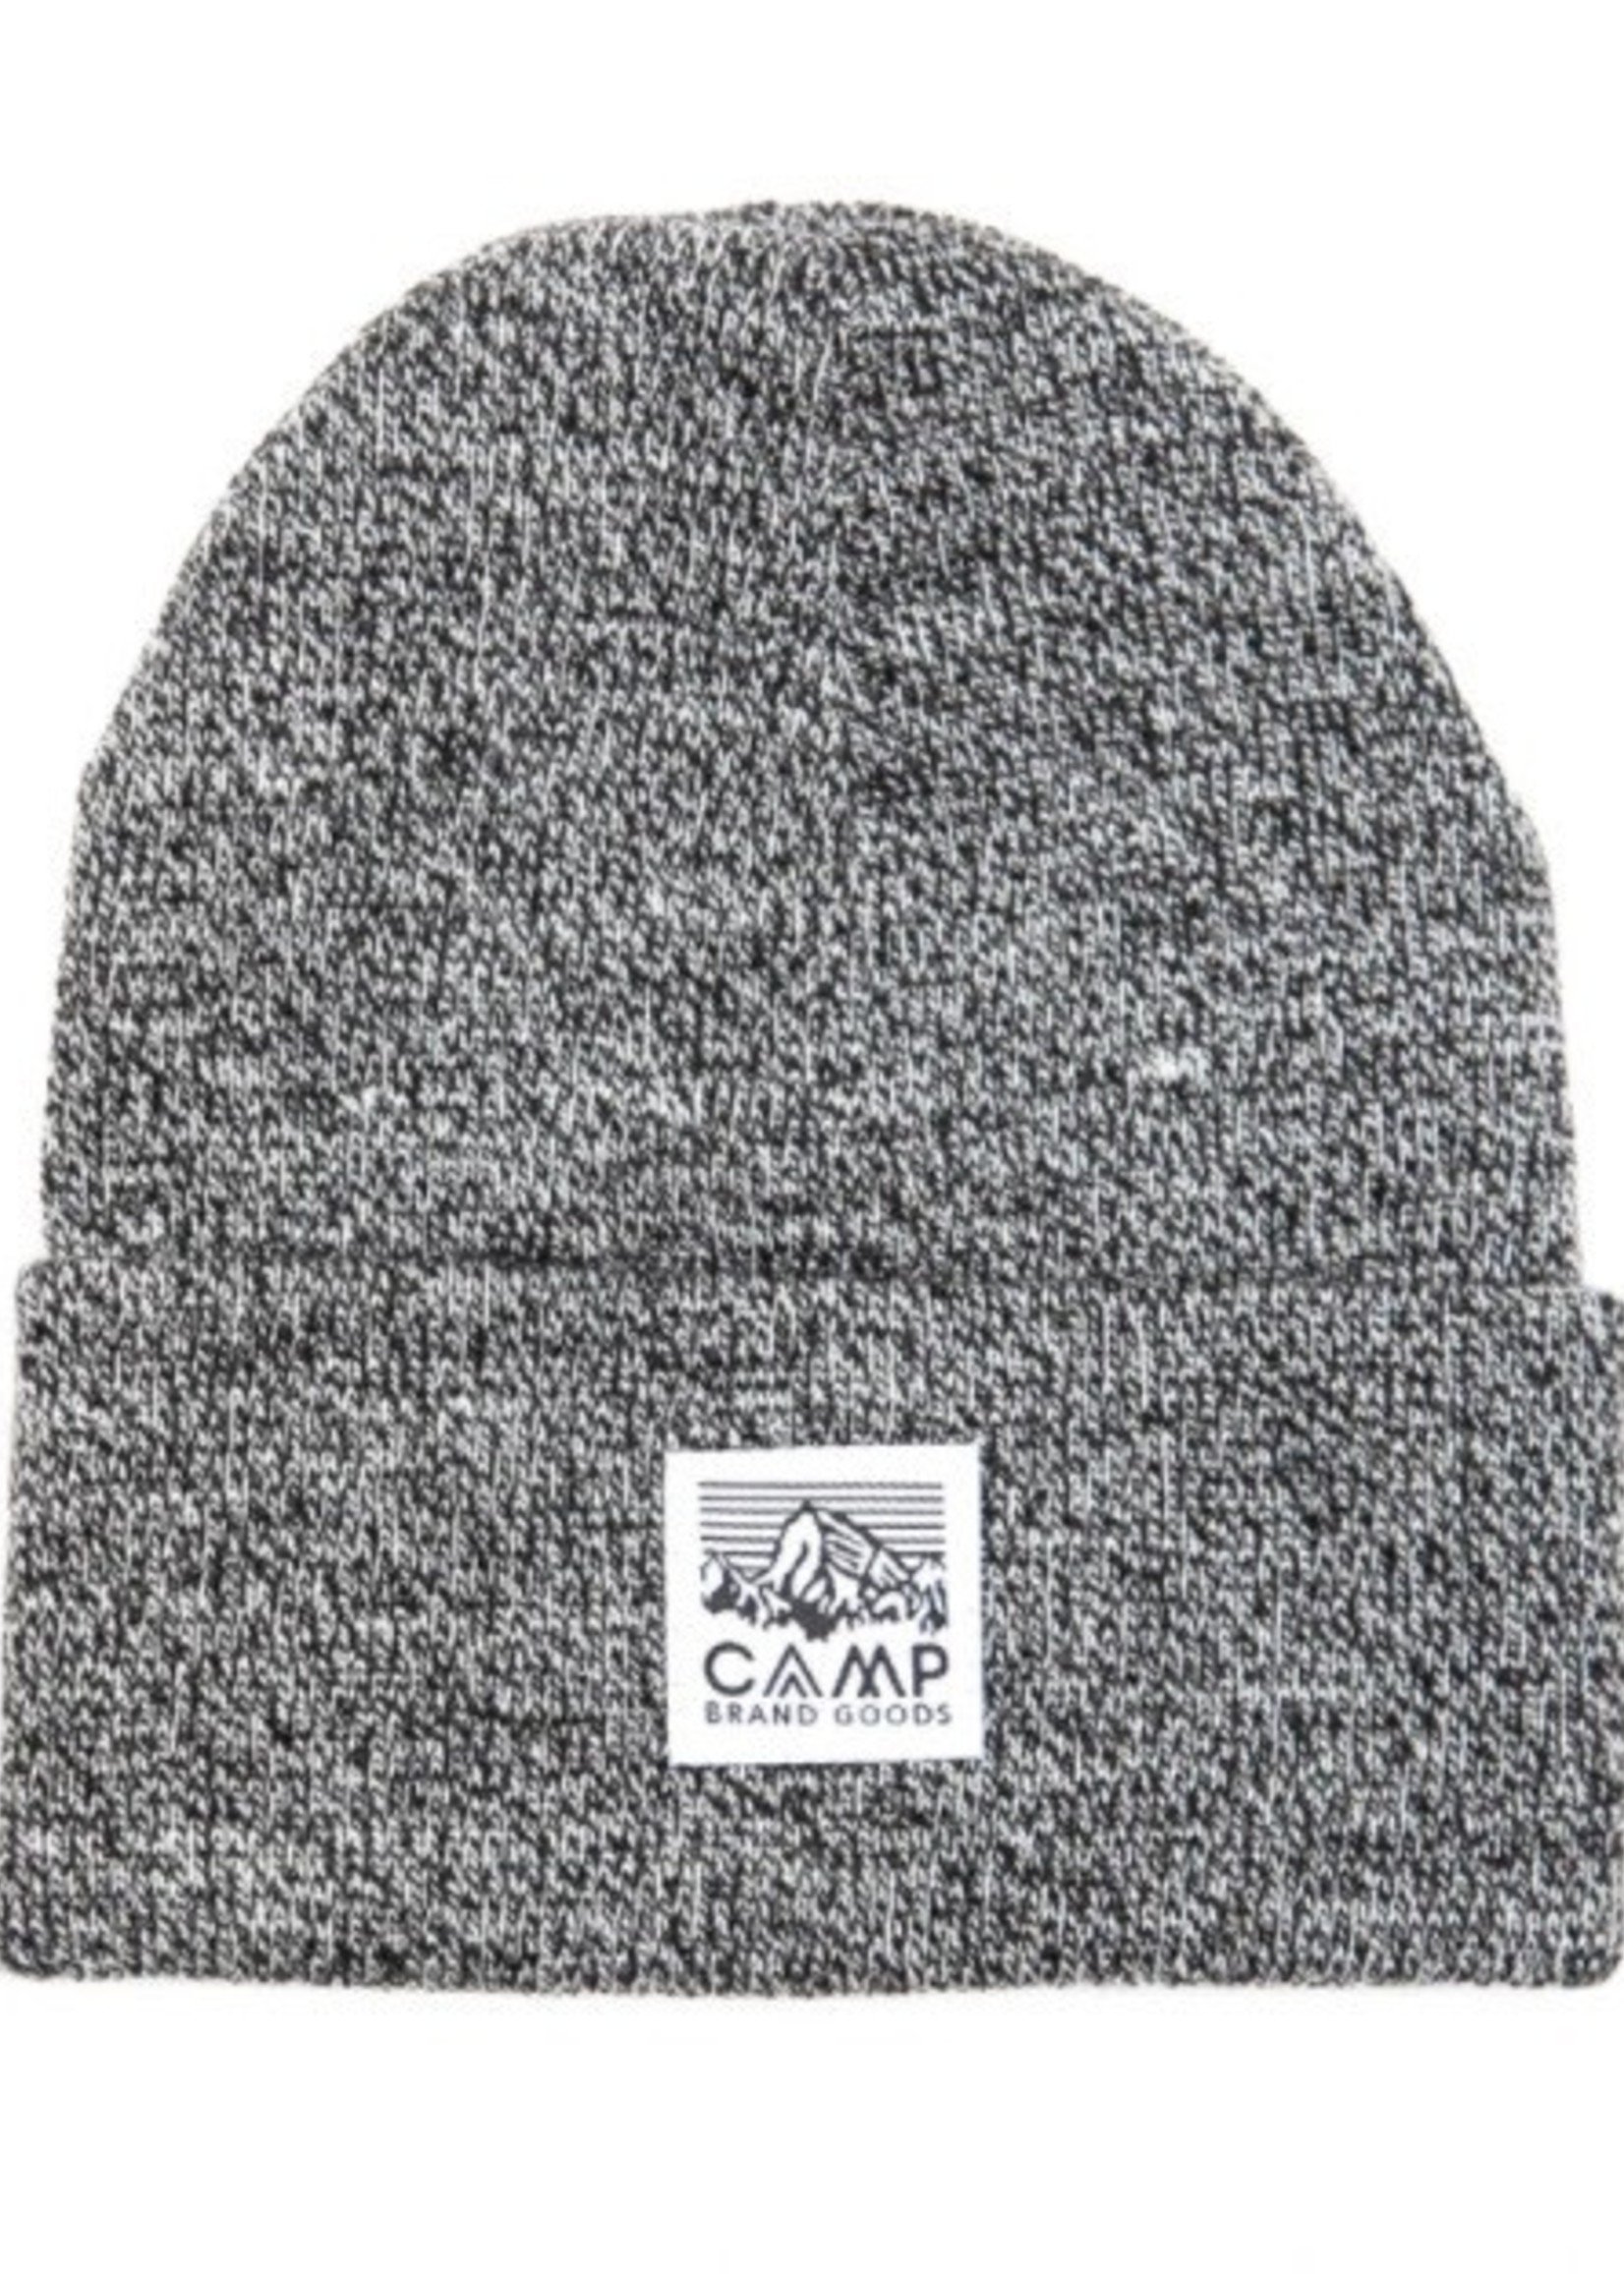 Camp Brand Goods Tuques Camp Brand Goods